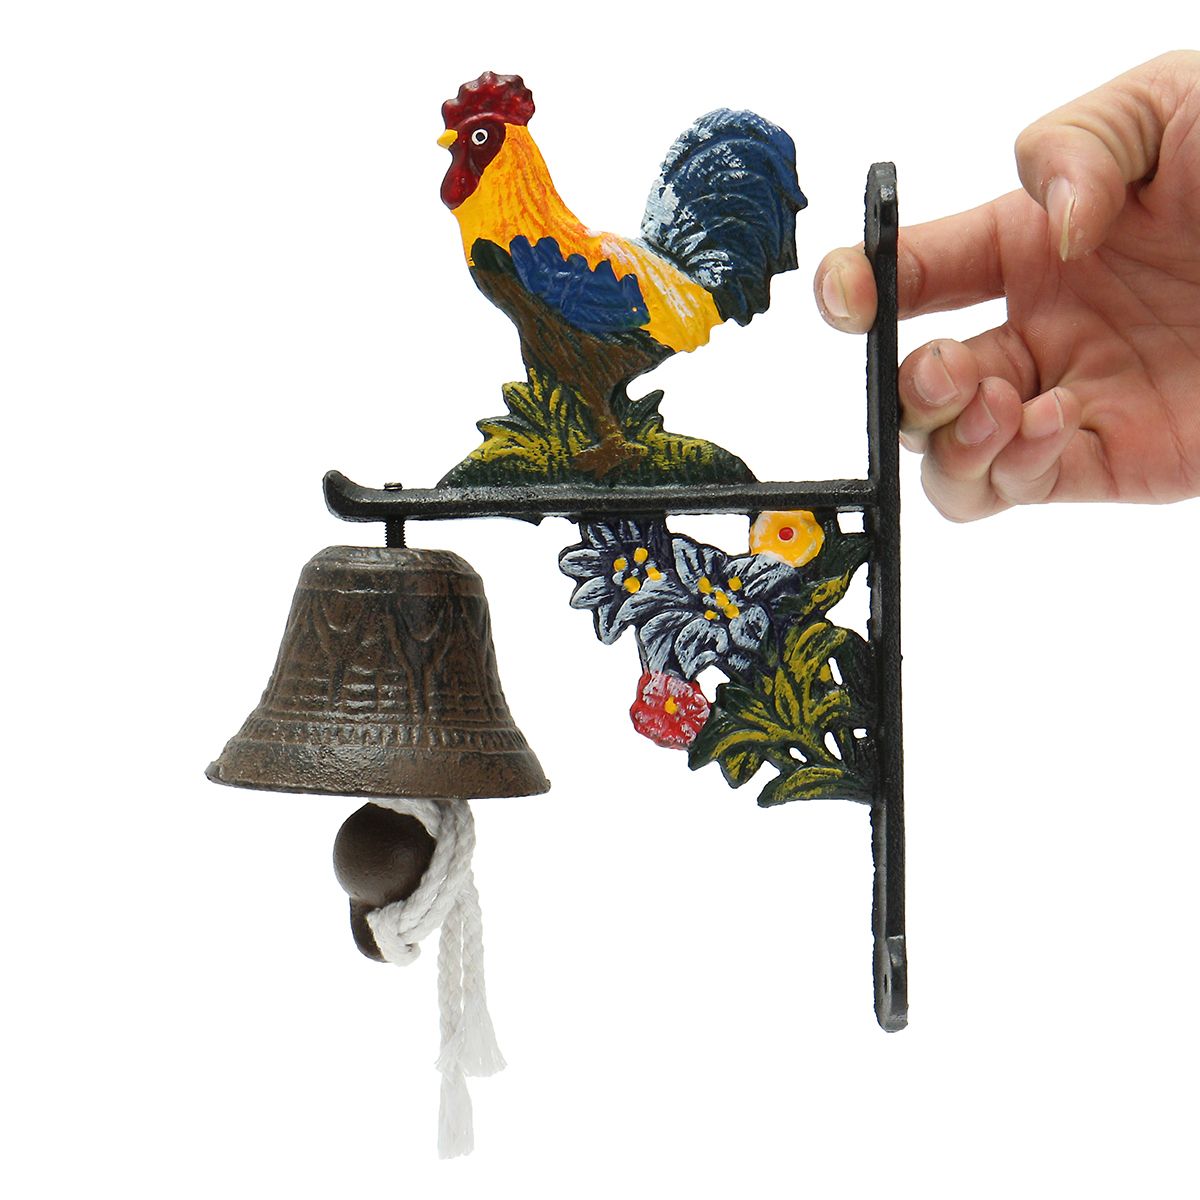 Brown-Metal-CockCast-iron-Doorbell-Wall-Mounted-Garden-Decoration-Vintage-Style-1160952